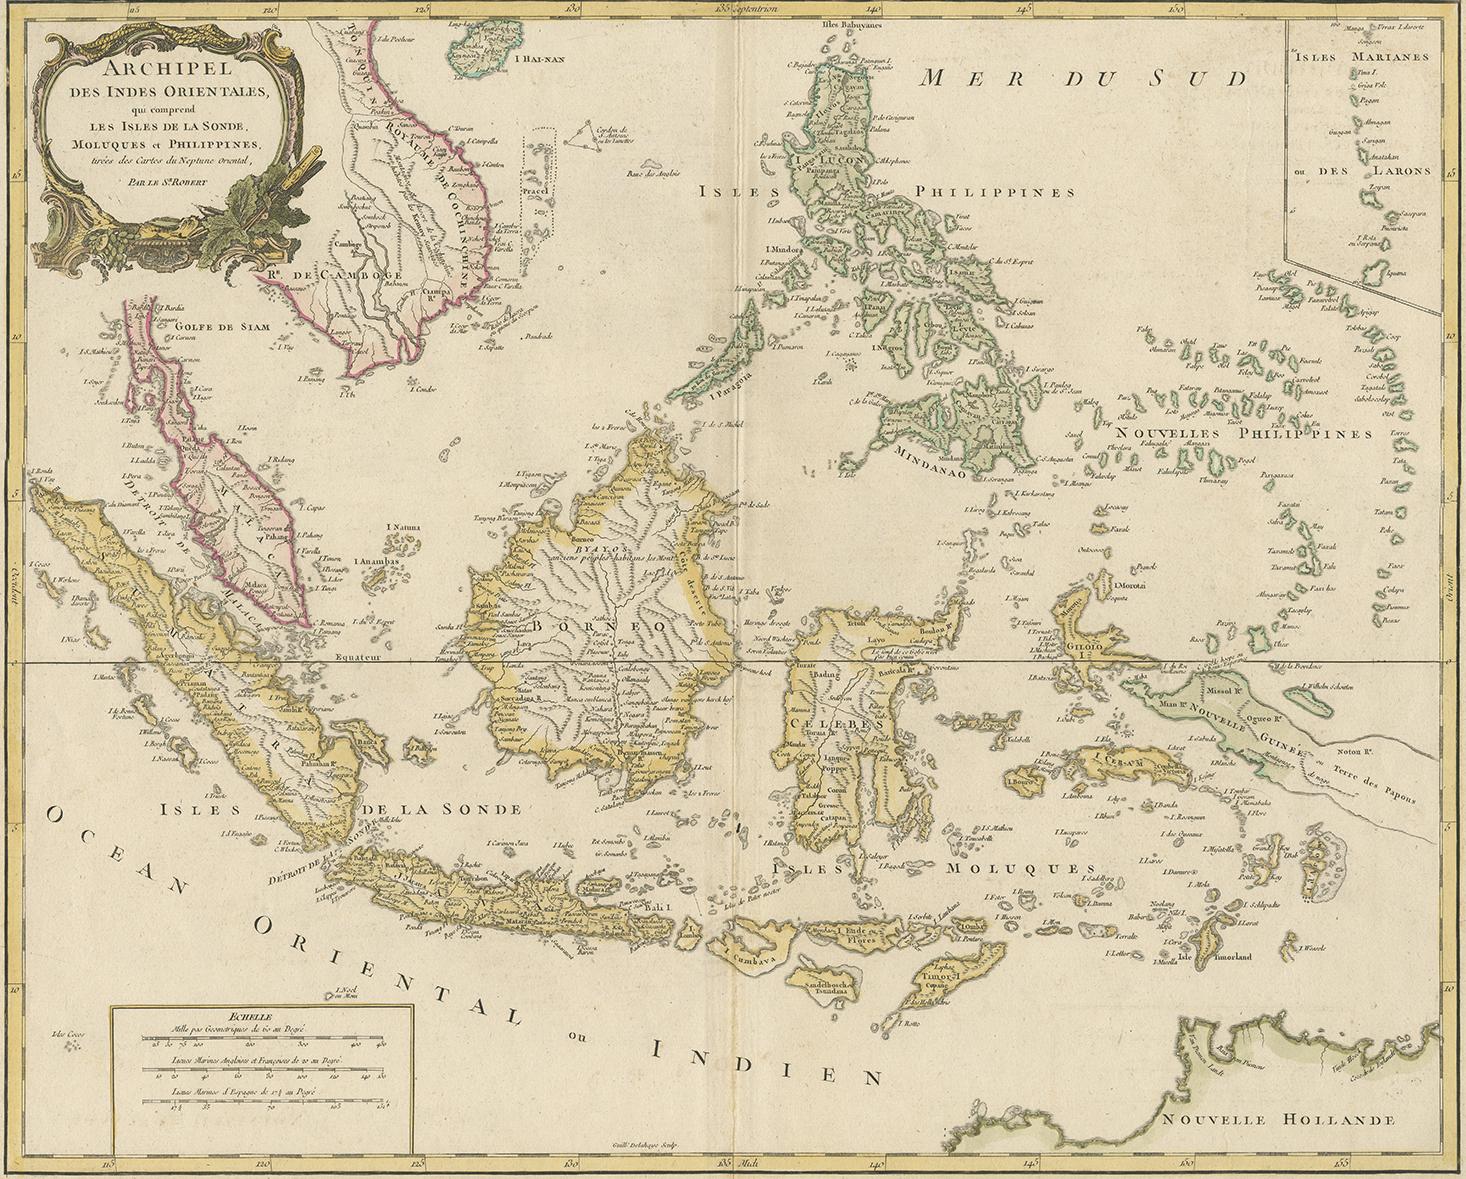 Striking and highly detailed map of the region from Sumatra and Malaca and Southern China to the Philipines, New Guinea and Northern Australia, centered on Borneo. Includes a large inset of the Marianas. Wonderful early detail, derived from the